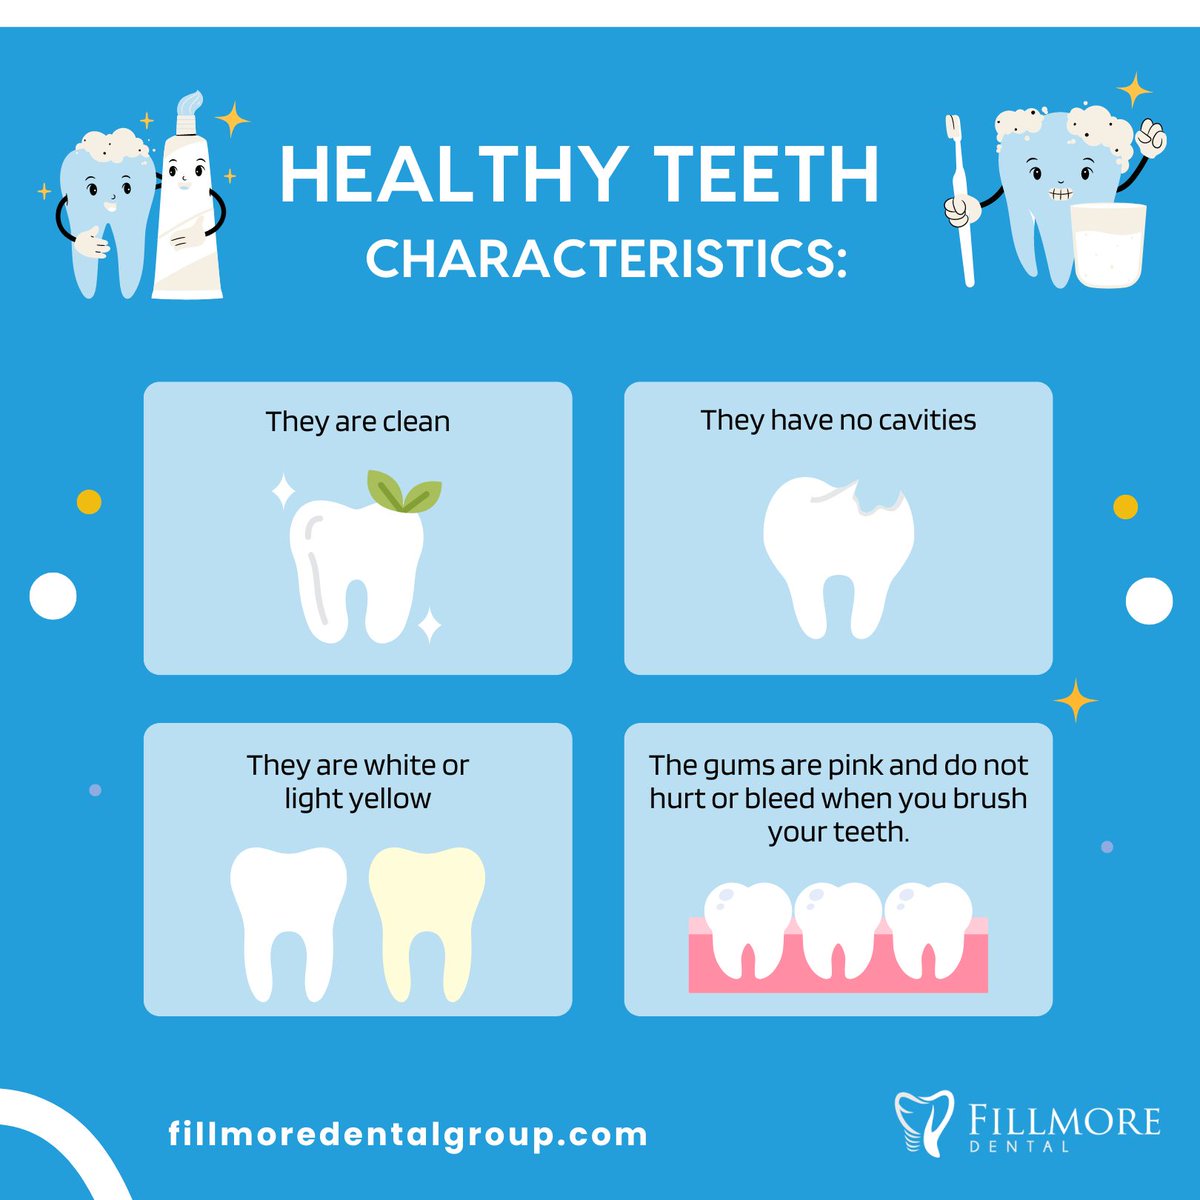 Healthy teeth: the hallmark of a beautiful smile and your lifelong companions. Discover the #FillmoreDentalGroup difference today! 😄✨ #HealthyTeethtips #teethtips #smiletips #fixyoursmile #dentalcare #oralhealth #fillmore #california